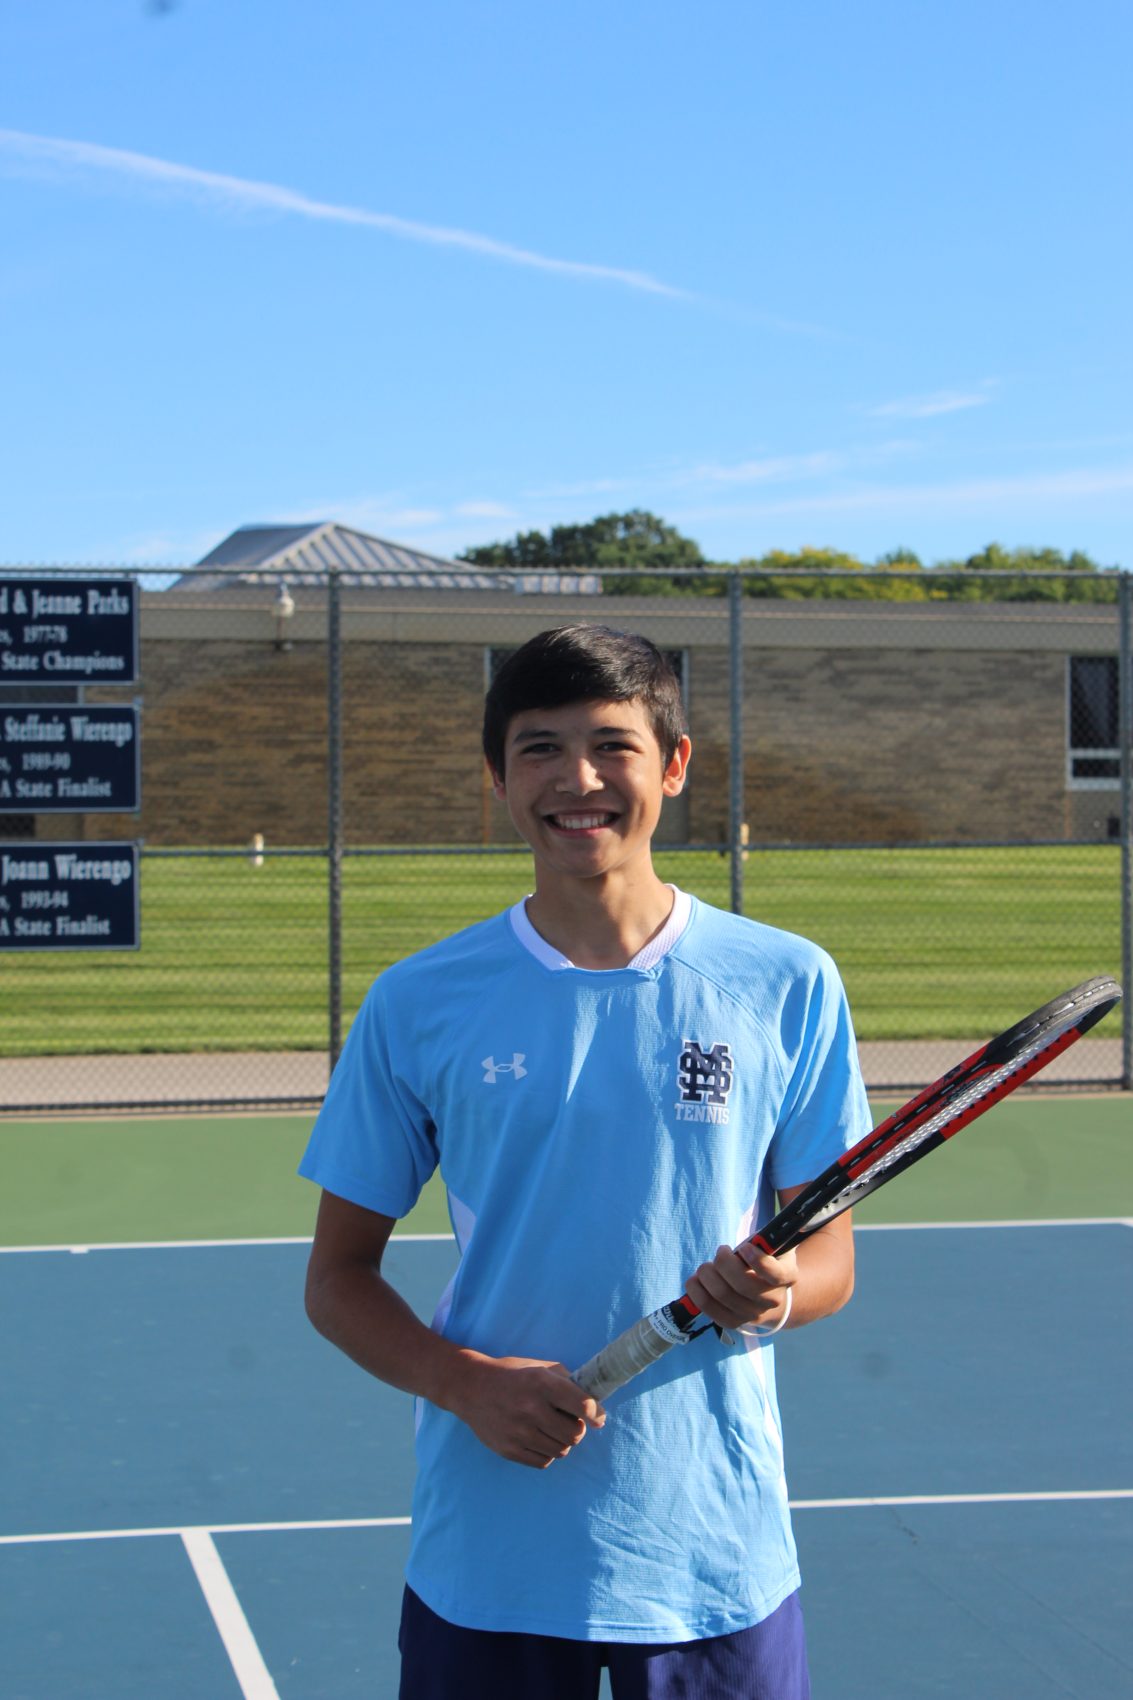 Mona Shores’ Powell earns LSJ tennis player of the month honor